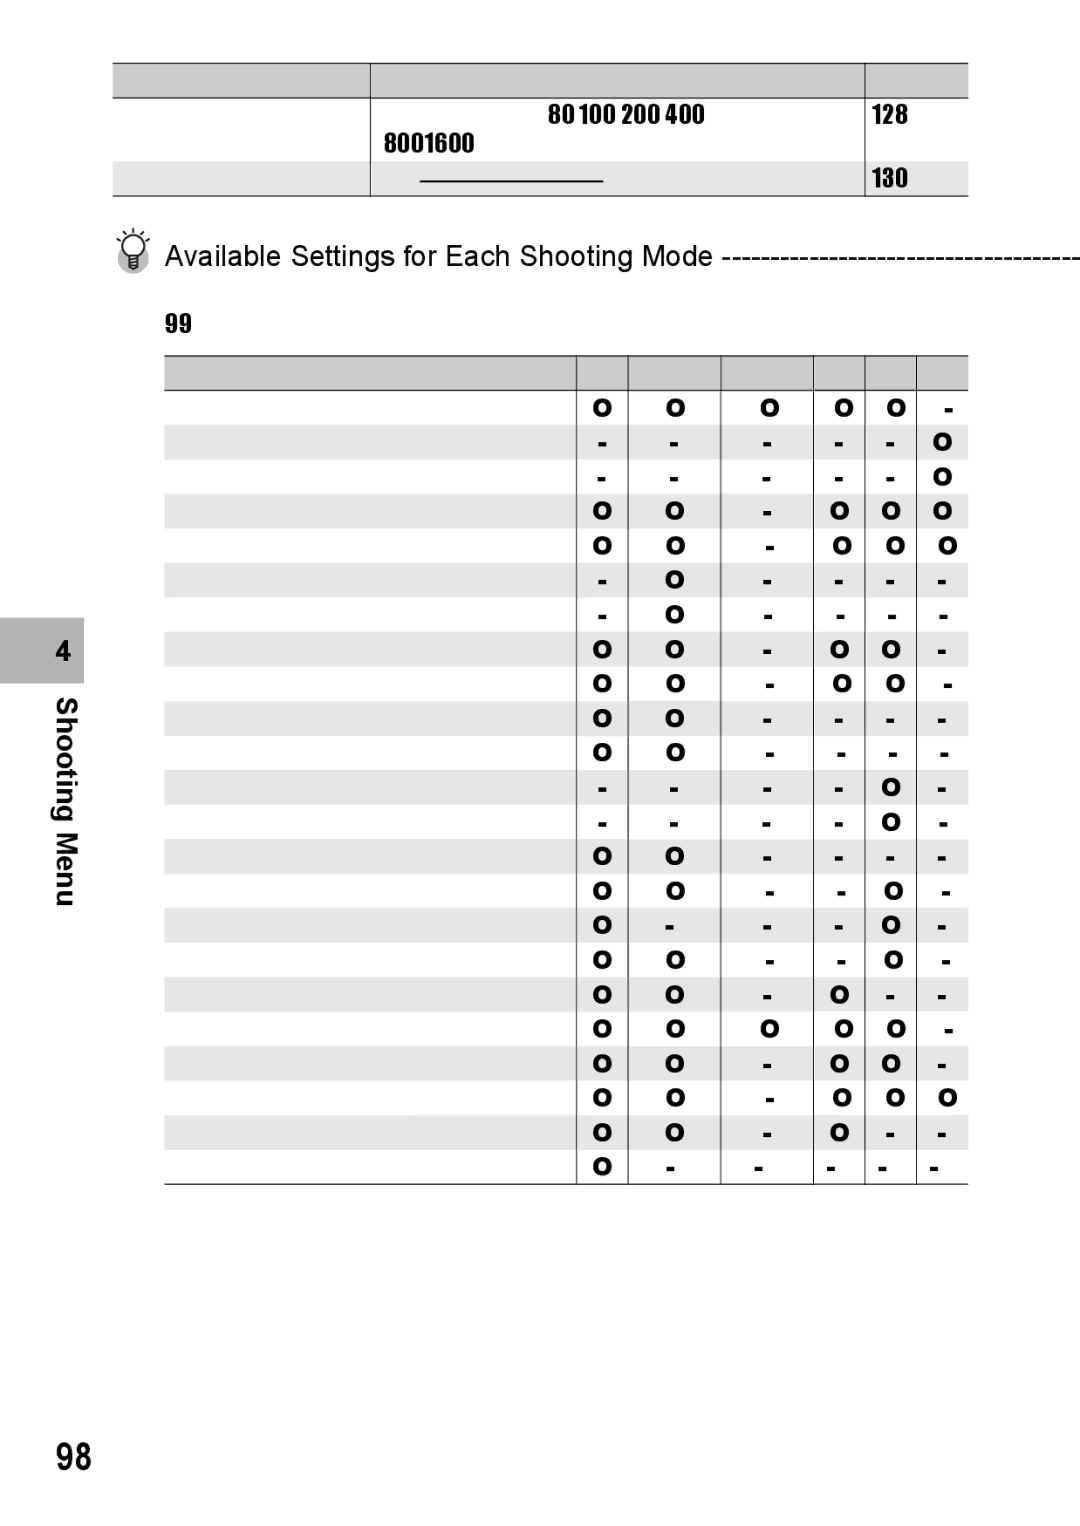 Samsung CX2 manual Available Settings for Each Shooting Mode 